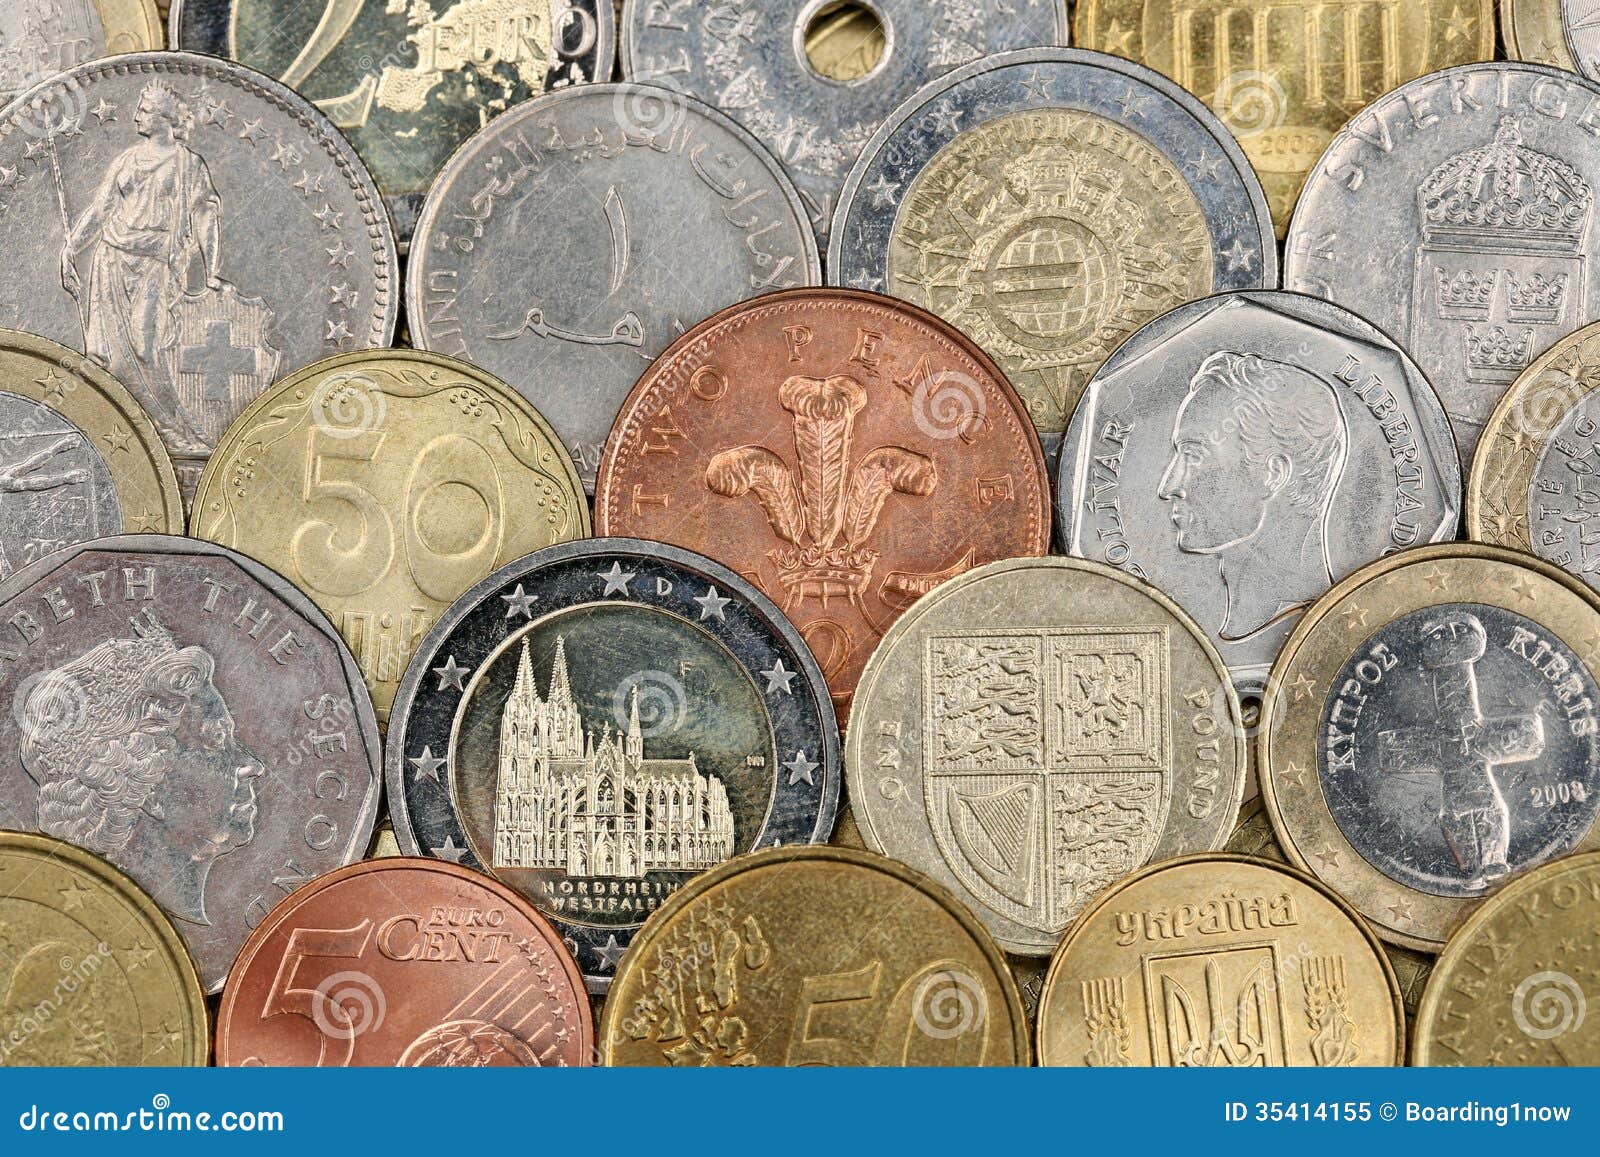 Coins From All Over The World Stock Image - Image of ...